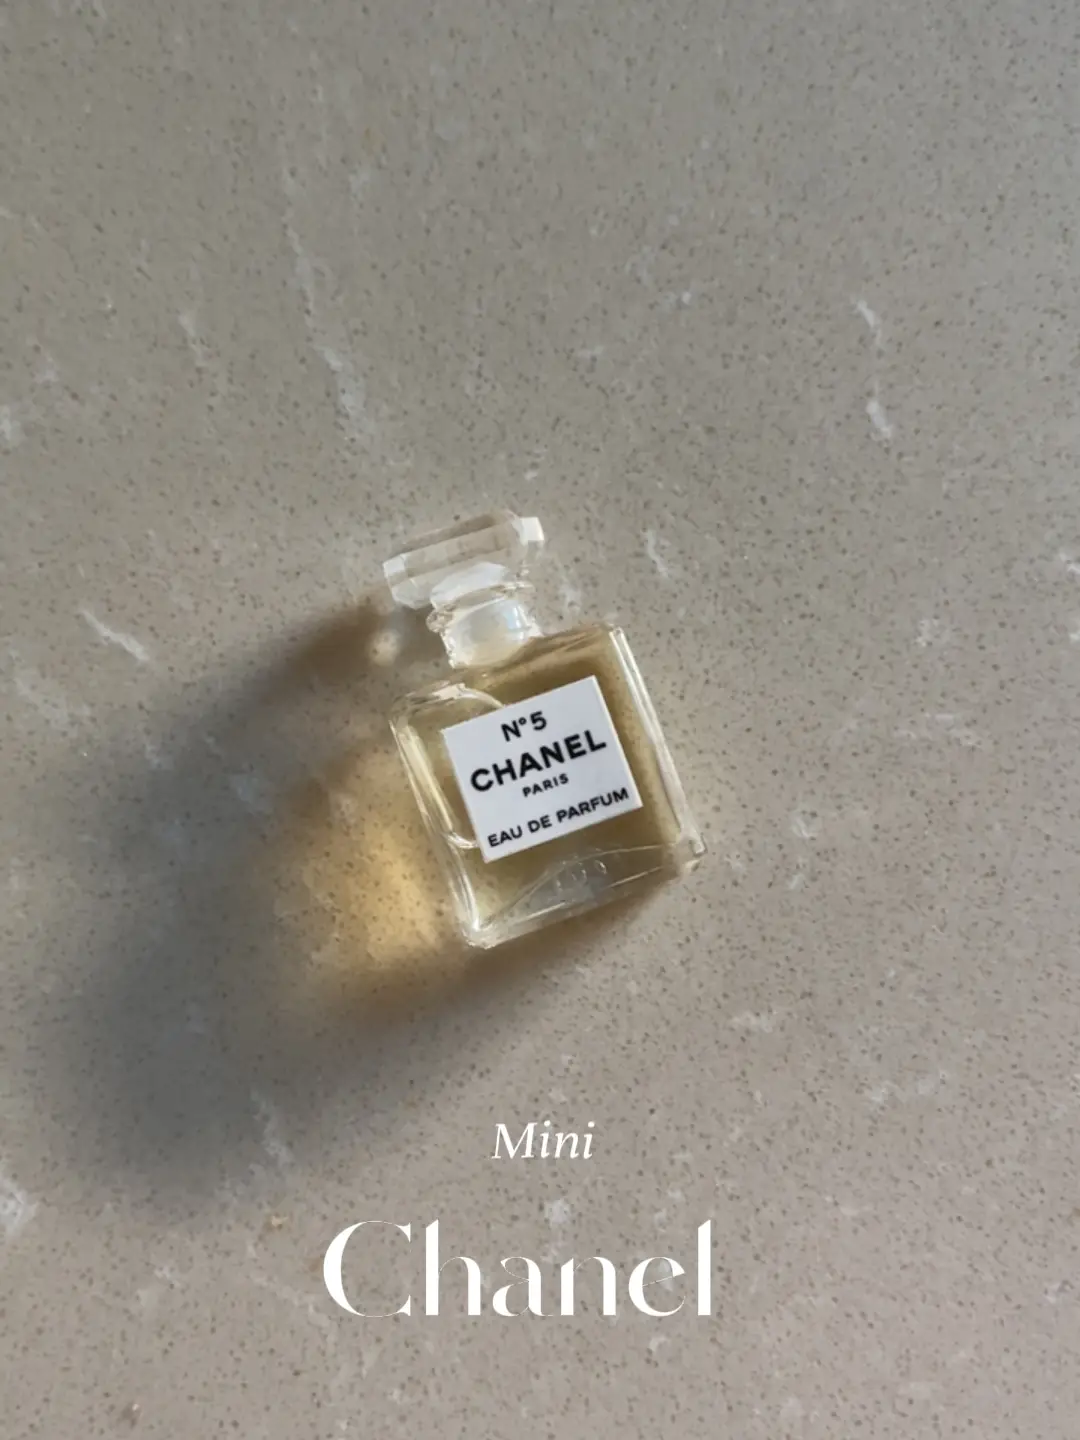 ∘₊✧──Vintage Mini Chanel Perfume──✧₊∘, Gallery posted by G A B R I E L A